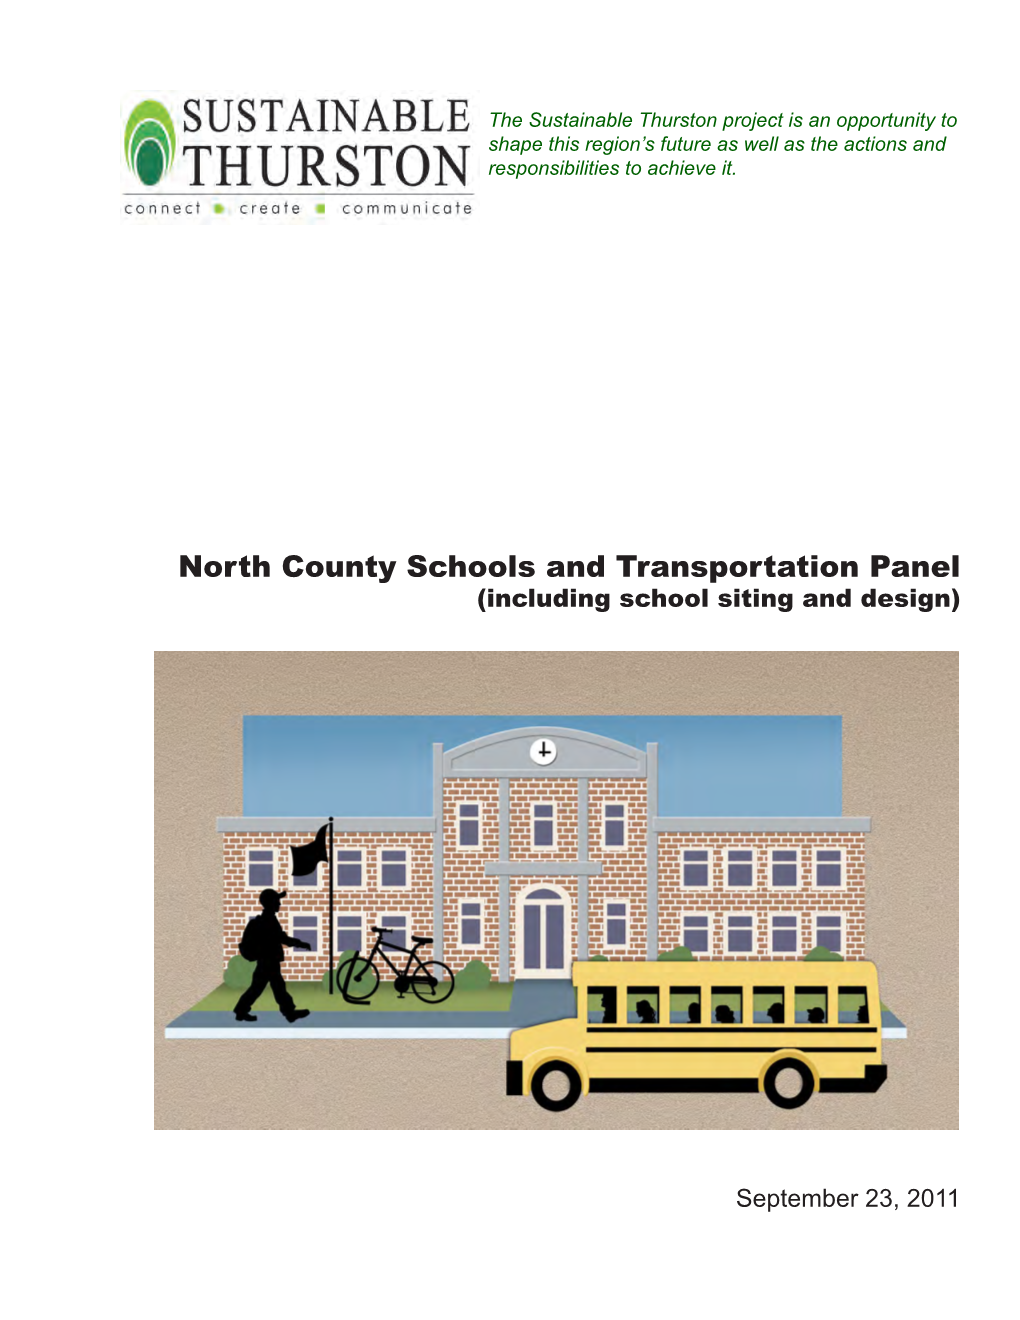 North County Schools and Transportation Panel (Including School Siting and Design)